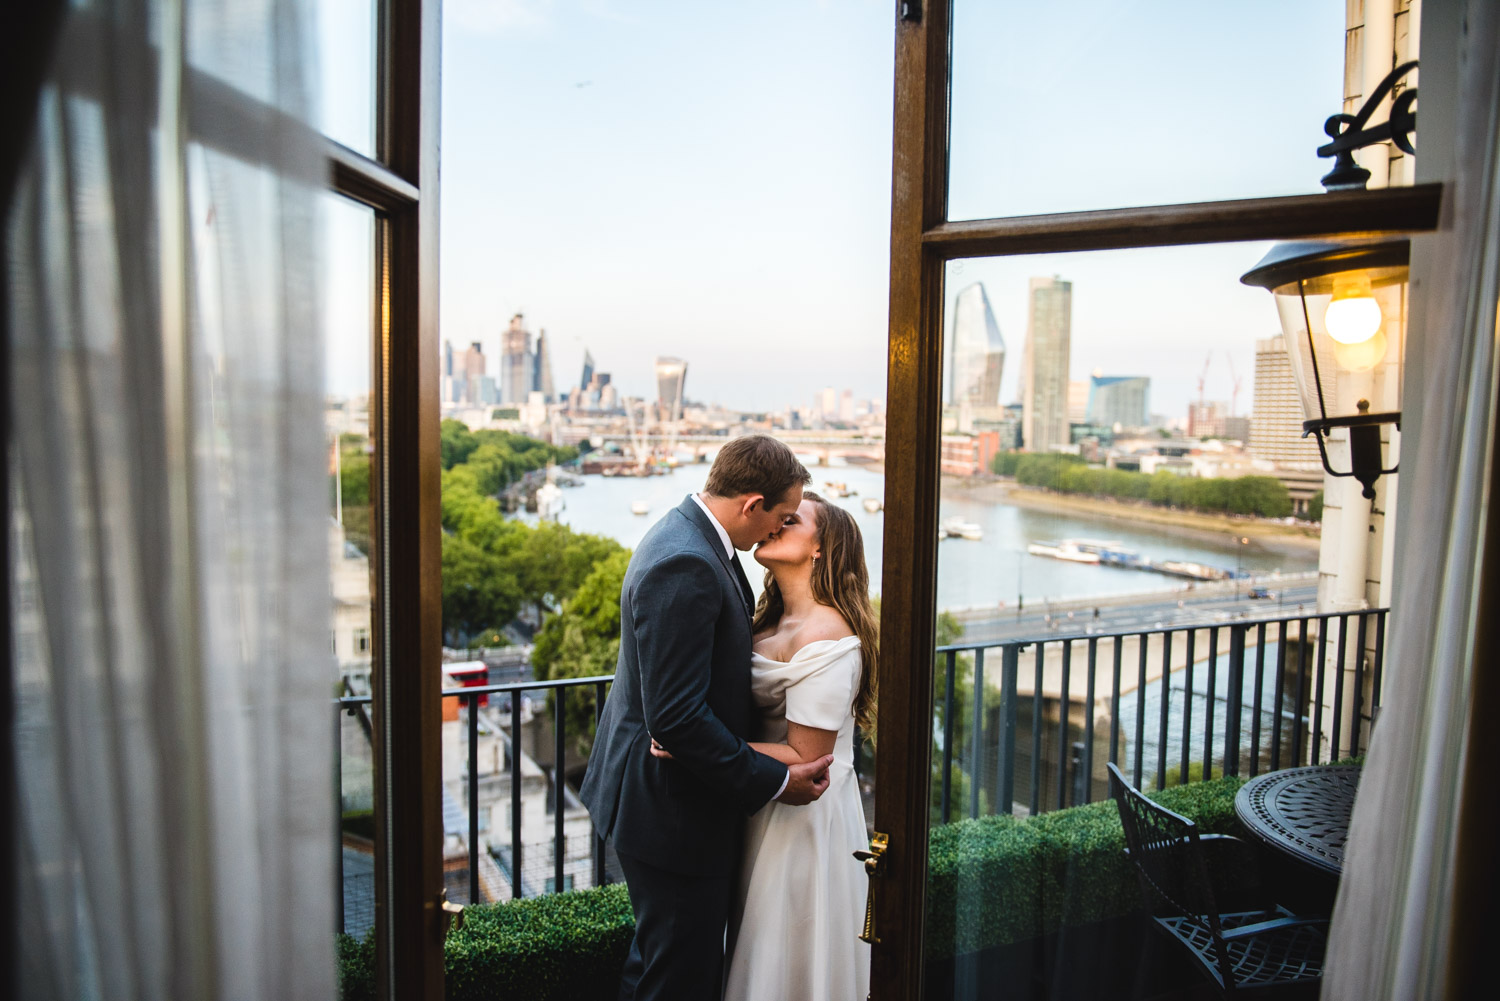 couple embrace on balcony at savoy hotel overlooking river thames and london